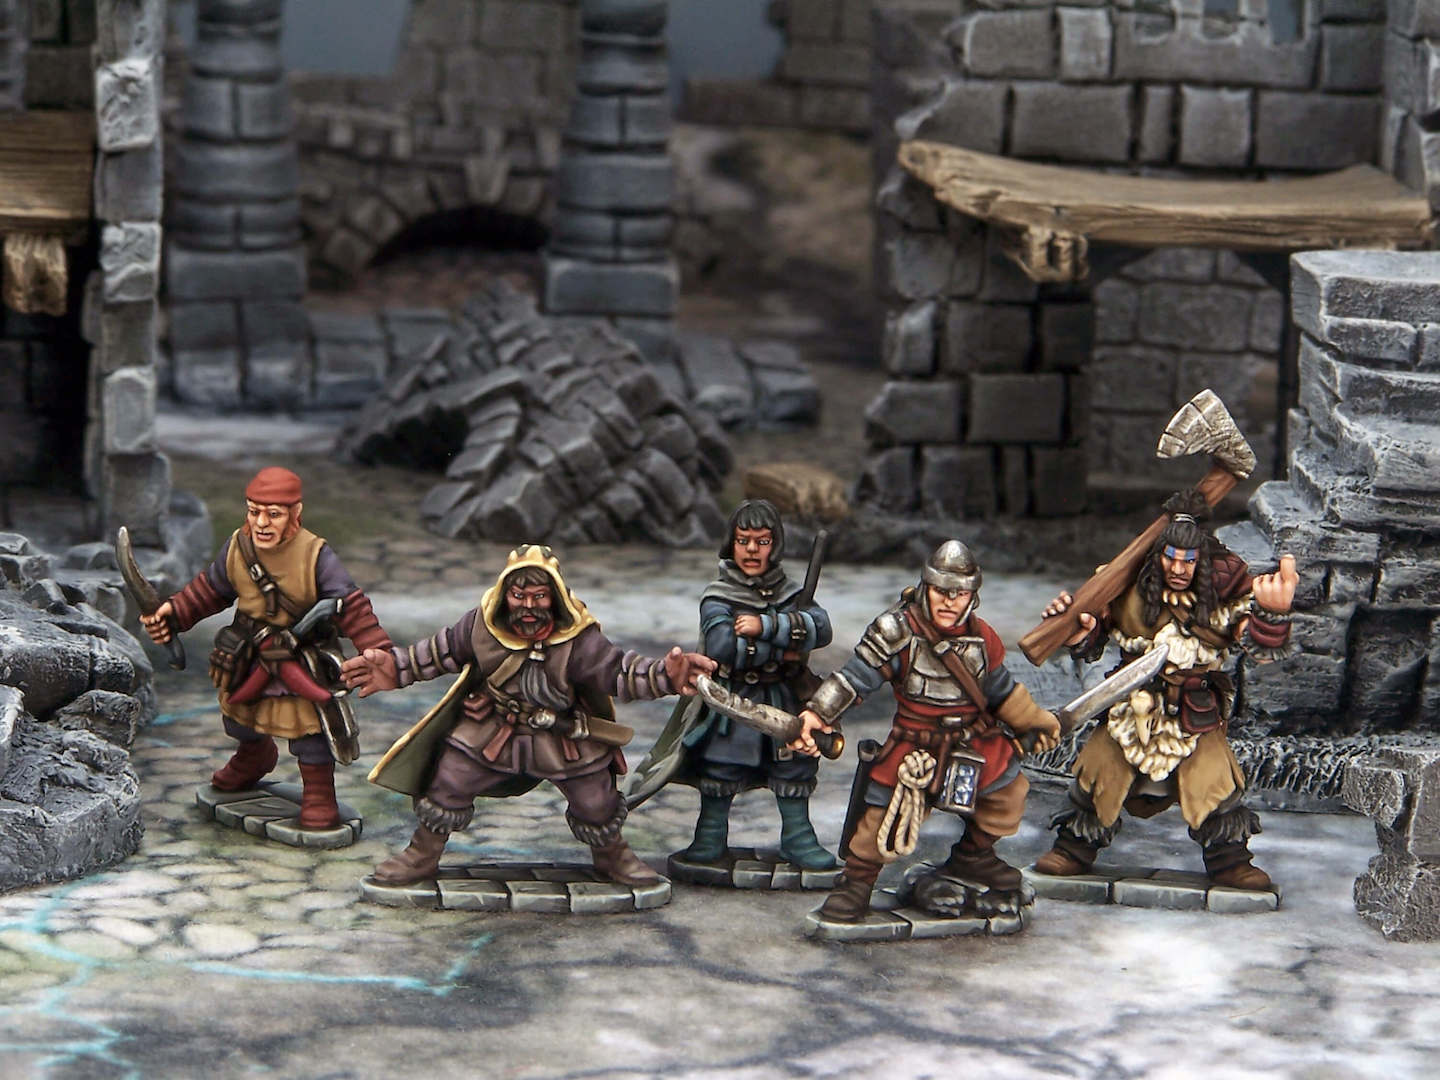 A band of Frostgrave soldiers ready for action in the frozen north